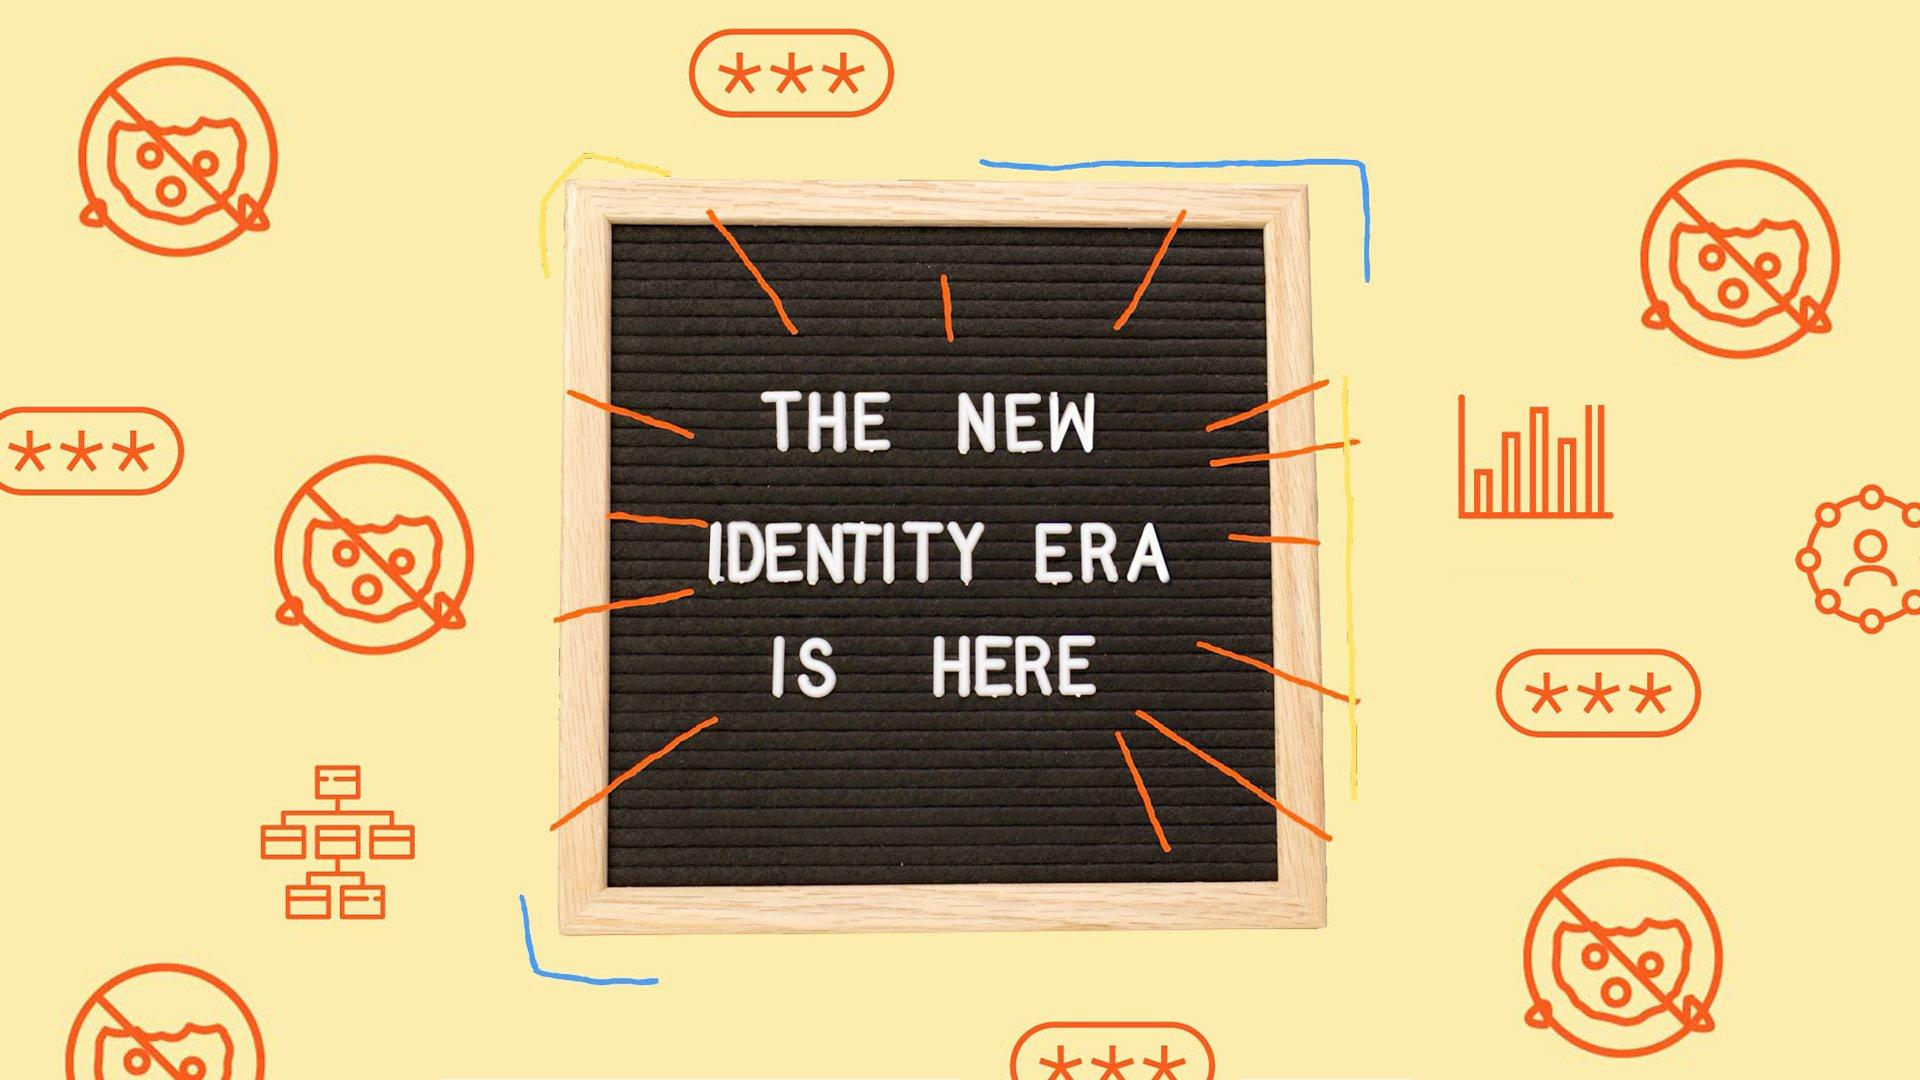 "The New Identity Era is Here"